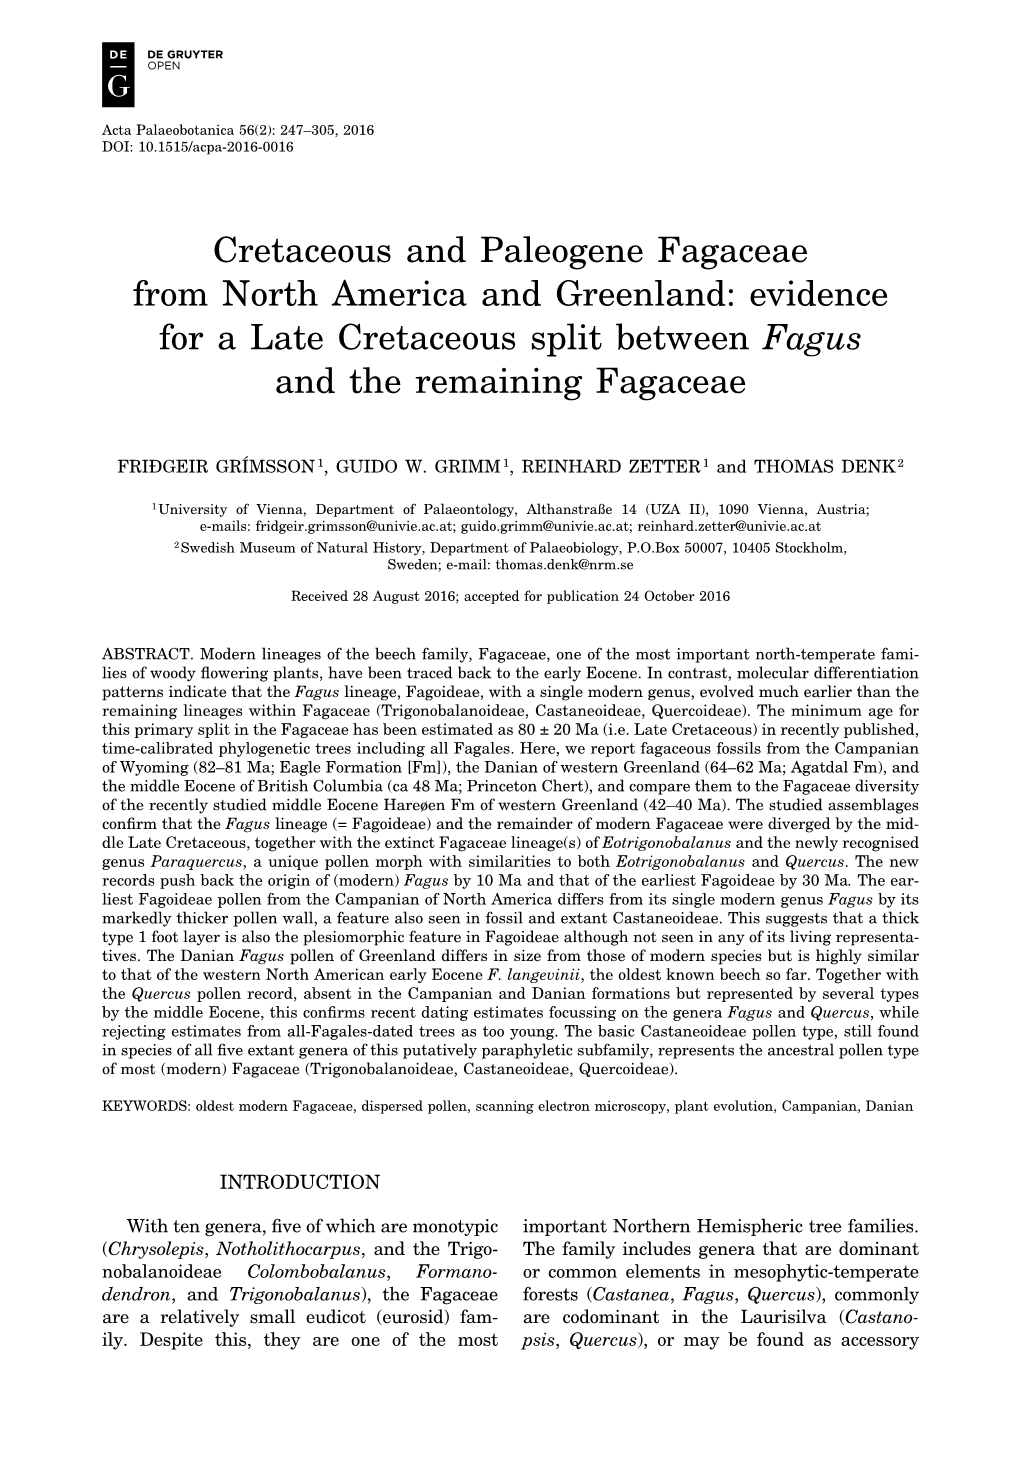 Cretaceous and Paleogene Fagaceae from North America and Greenland: Evidence for a Late Cretaceous Split Between Fagus and the Remaining Fagaceae